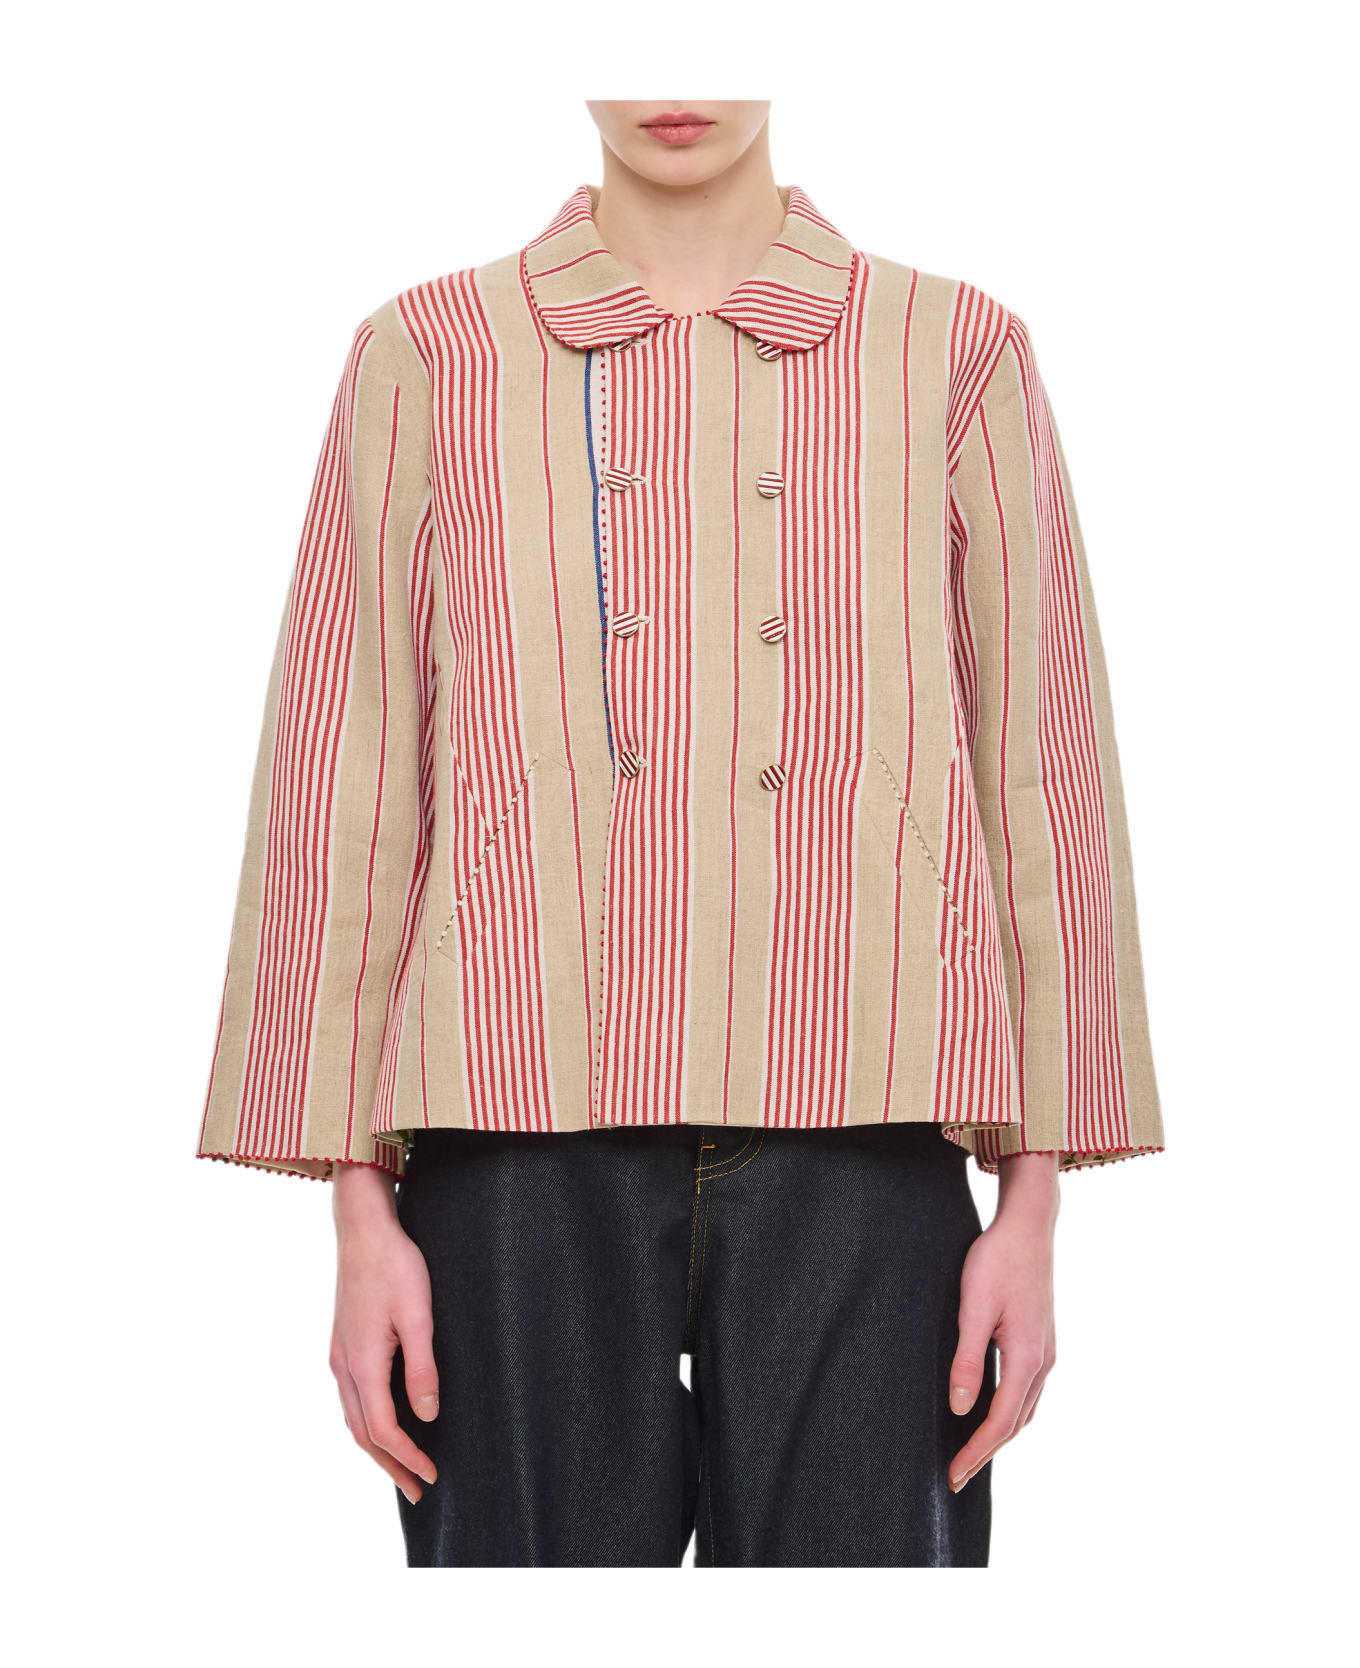 Péro Cotton And Linen Double Breasted Jacket - As Multi ブラウス